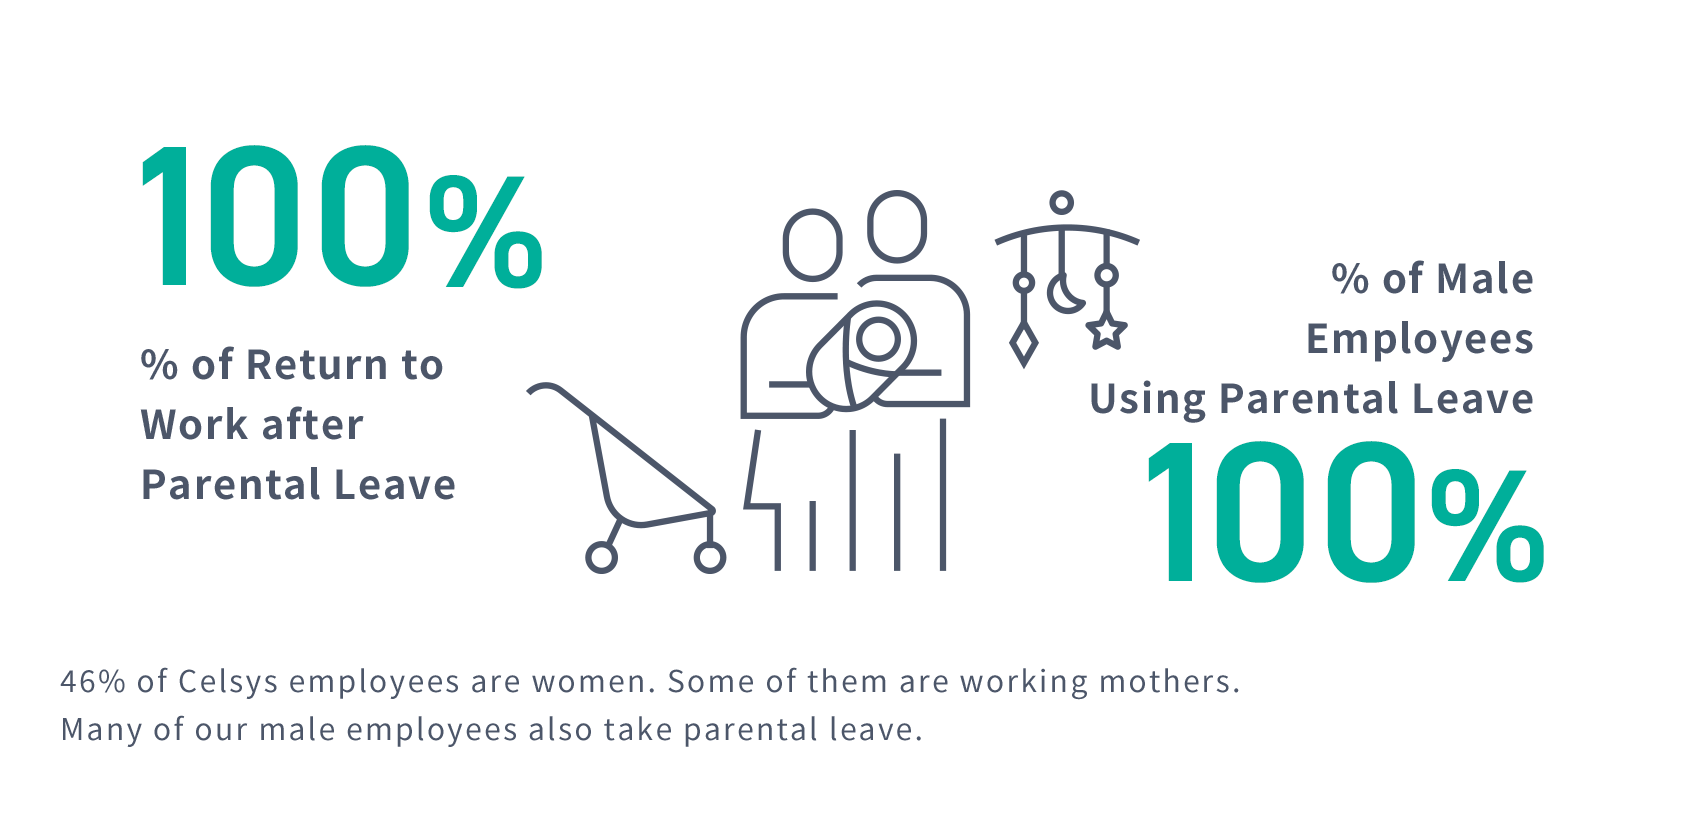 % of Return to Work after Parental Leave / % of Male Employees Using Parental Leave